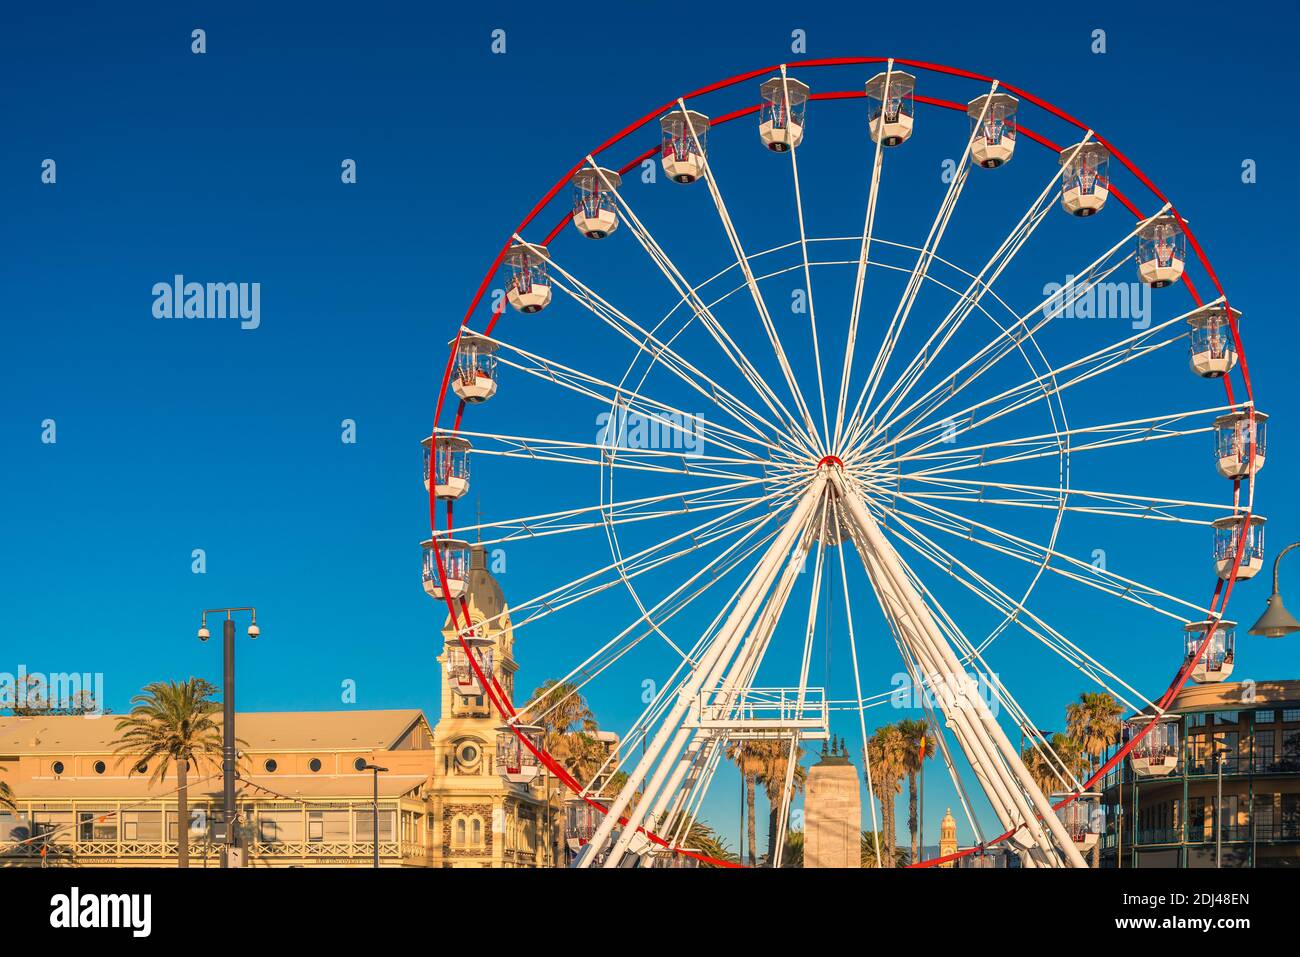 Adelaide, South Australia - January 12, 2019: Glenelg Giant Ferris Wheel at Moseley Square viewed from the jetty at sunset time Stock Photo